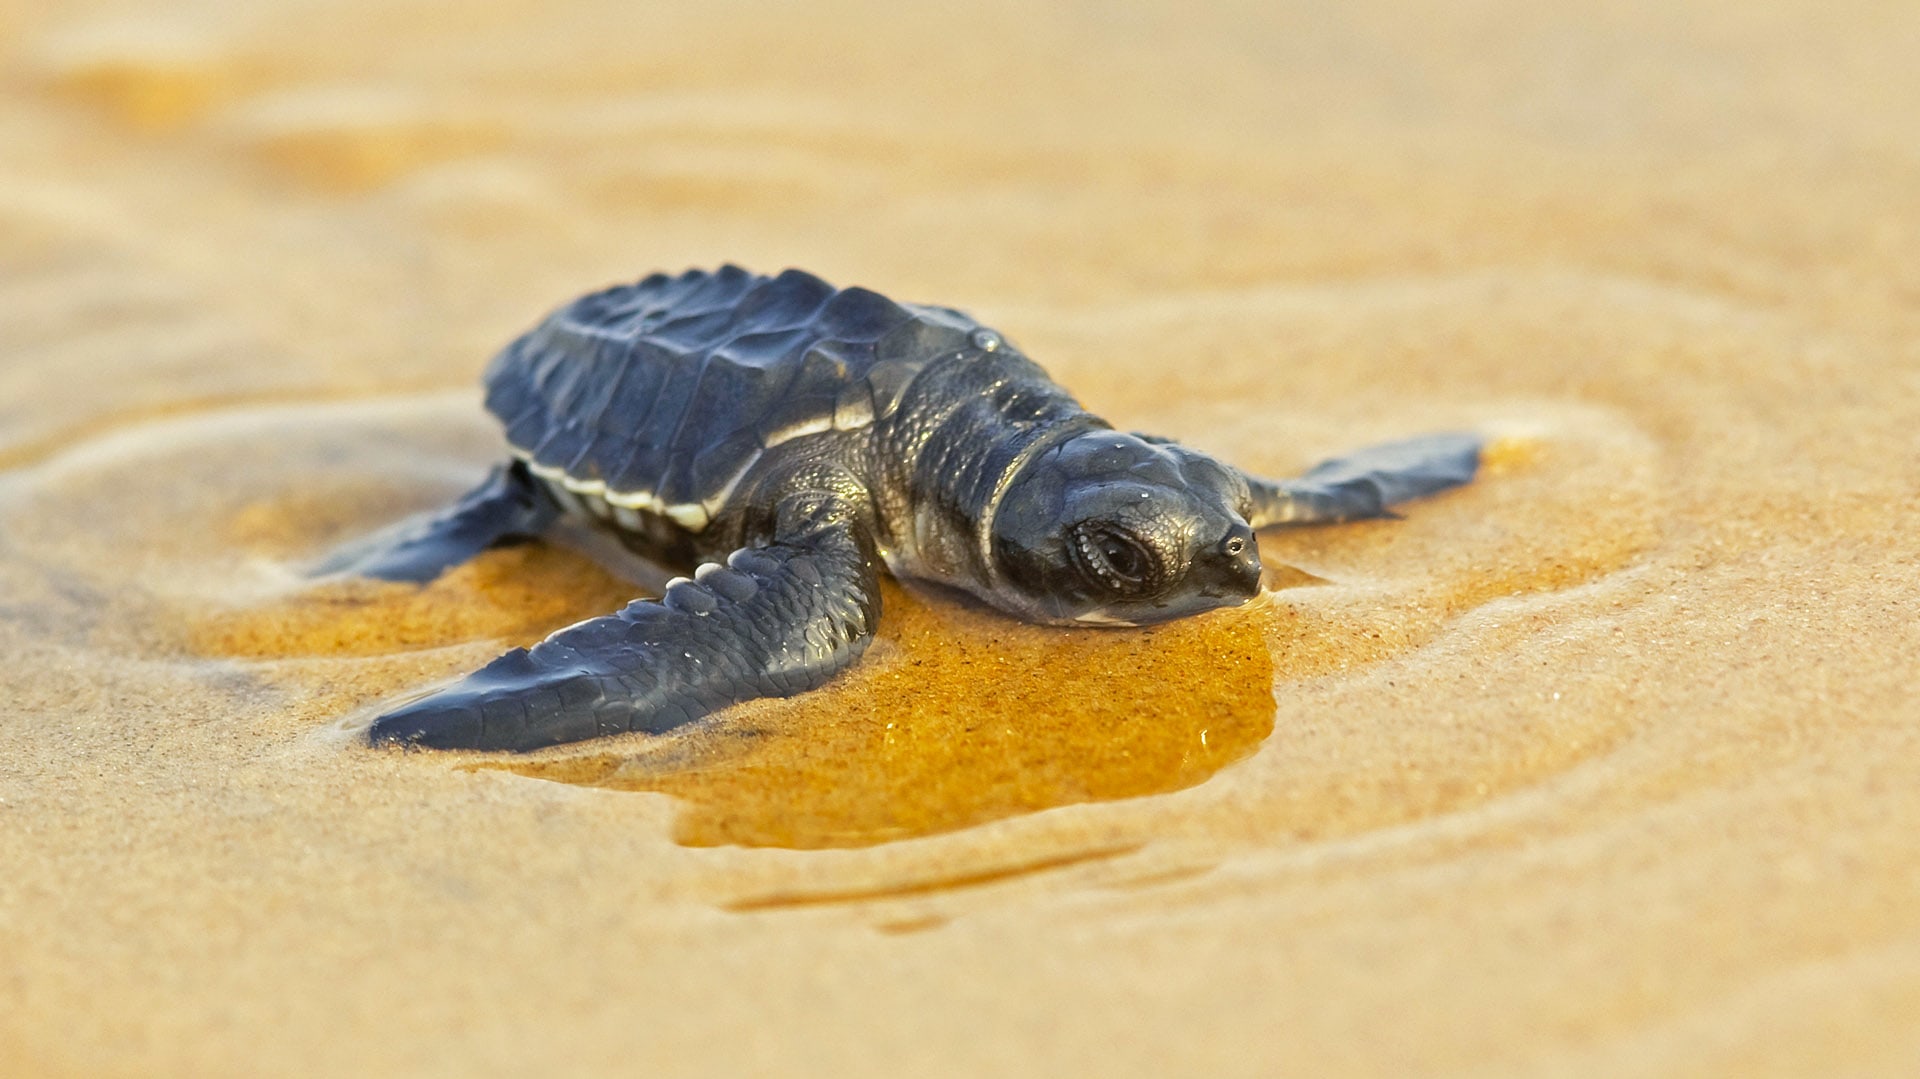 Climate Change impacts nesting of Olive Ridley Turtles